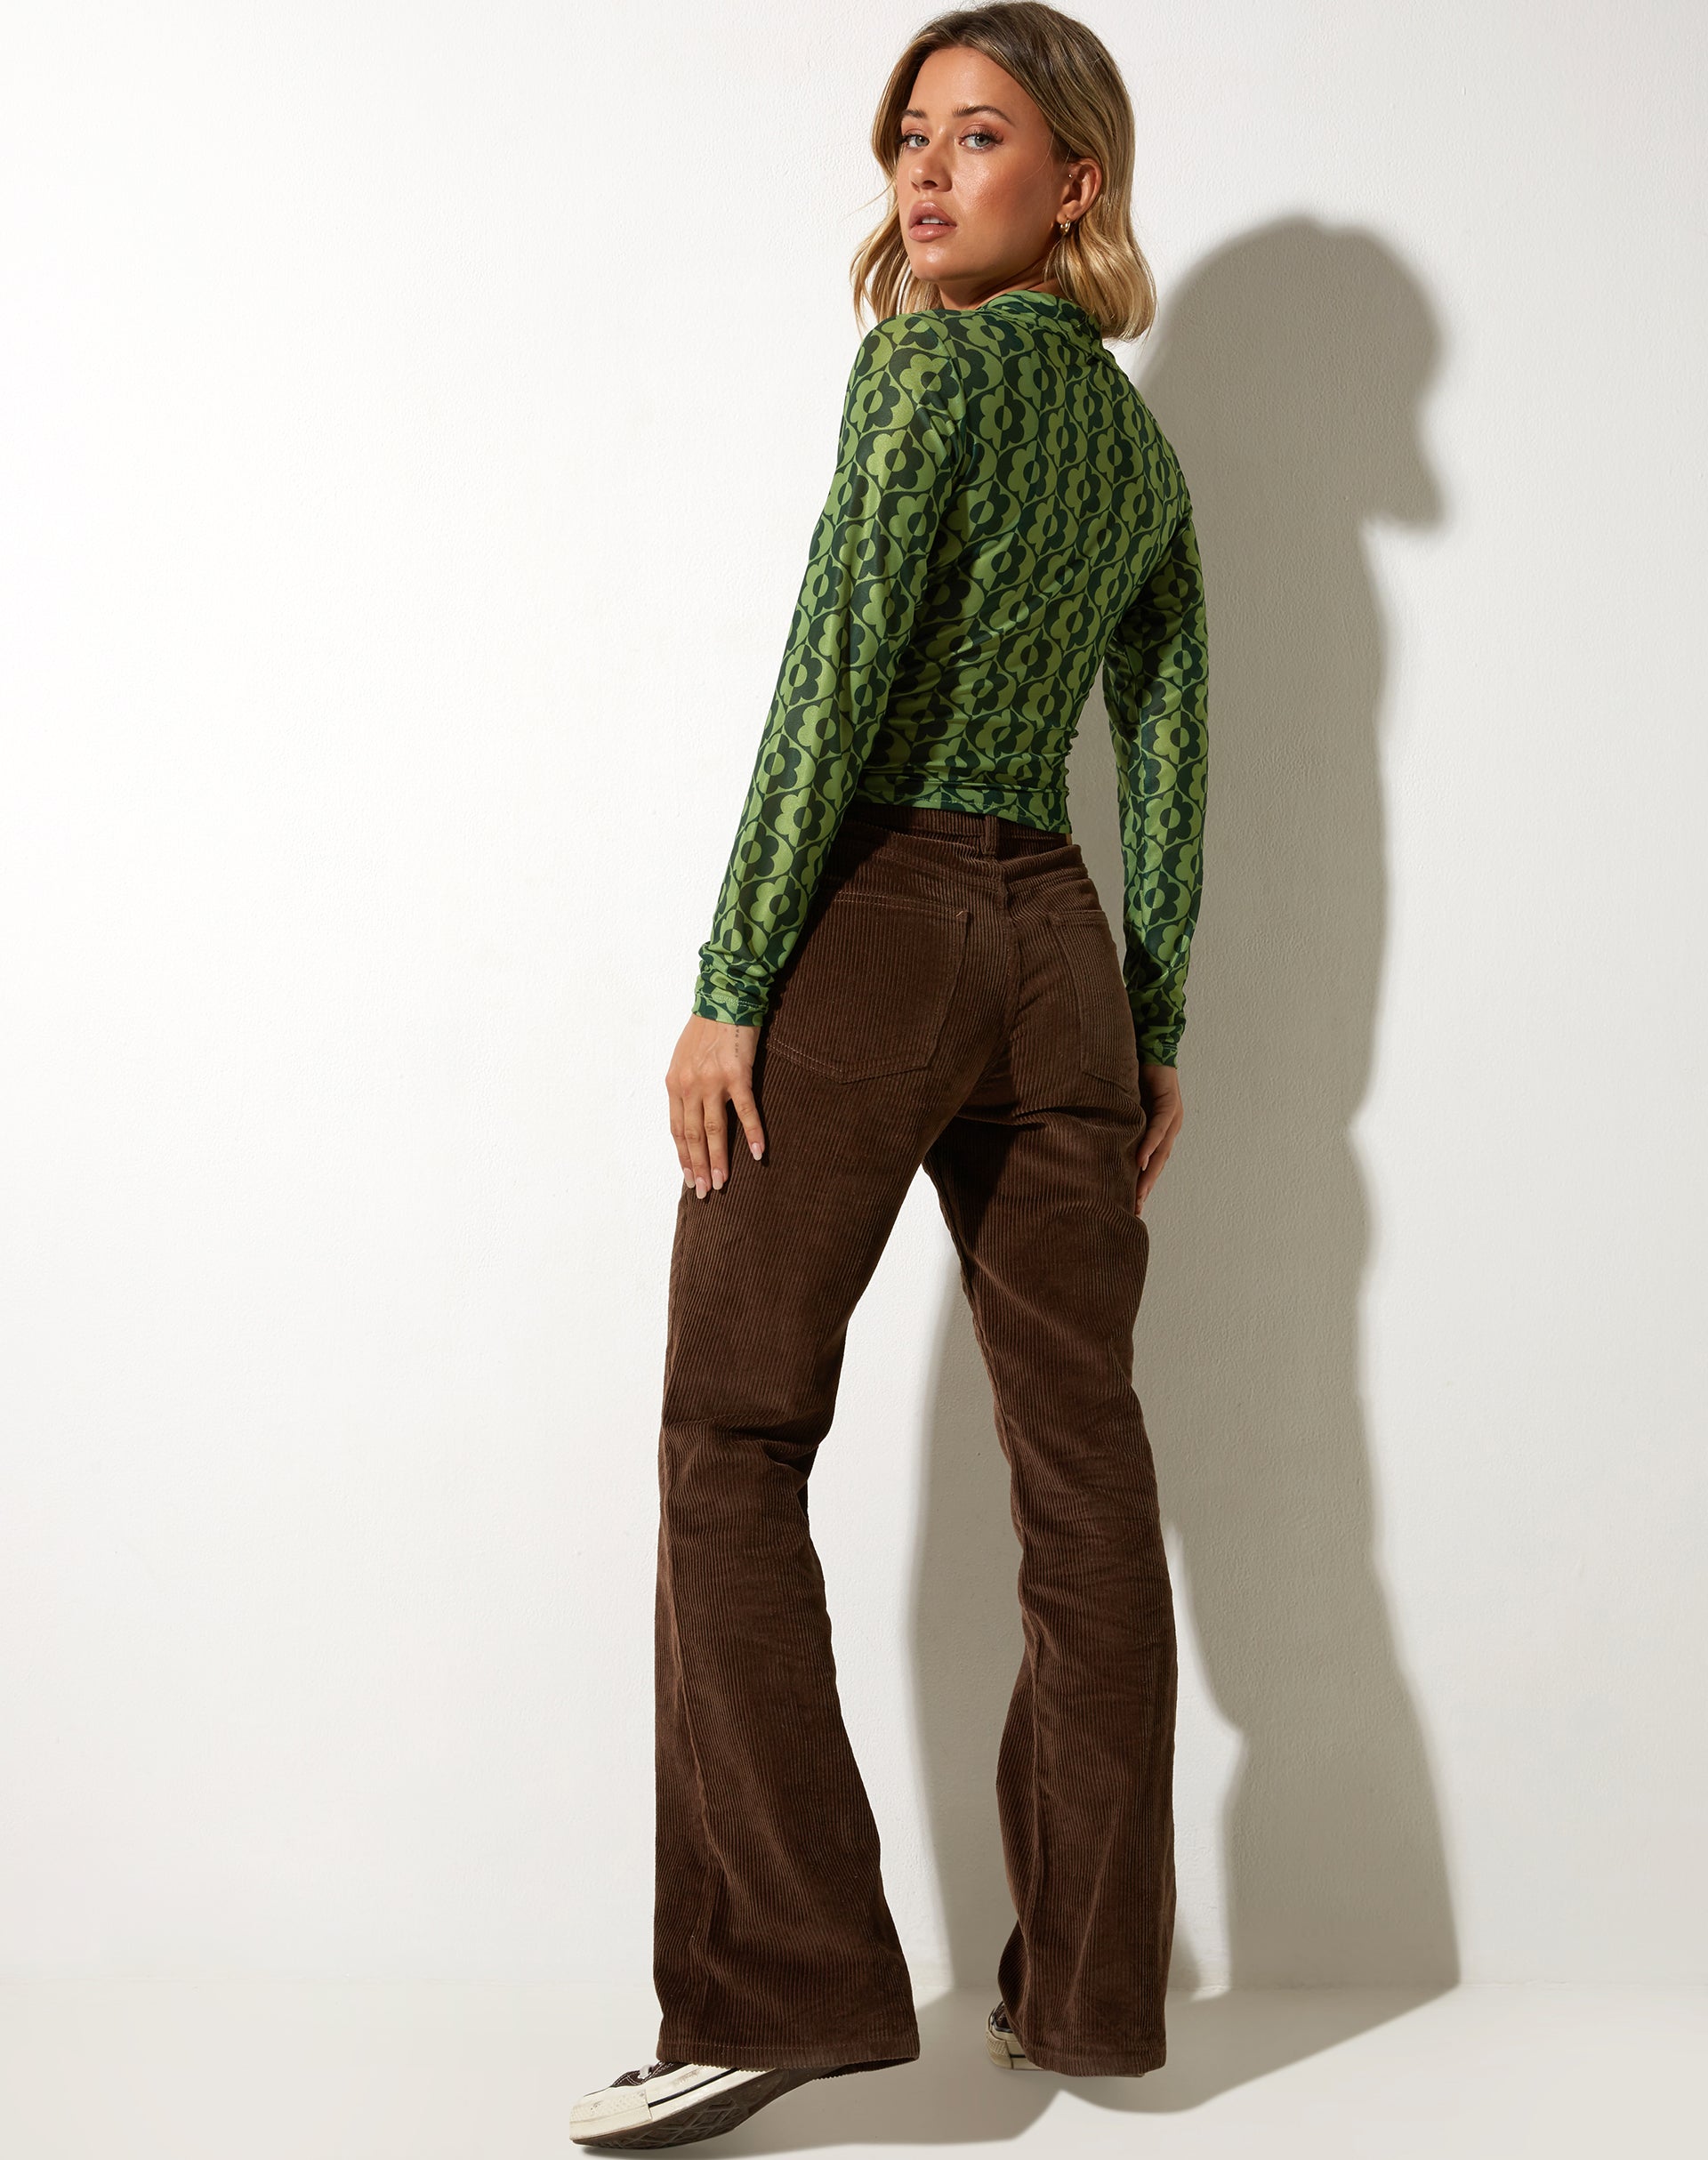 image of Kelly Cropped Shirt in Wavy Daisy Green